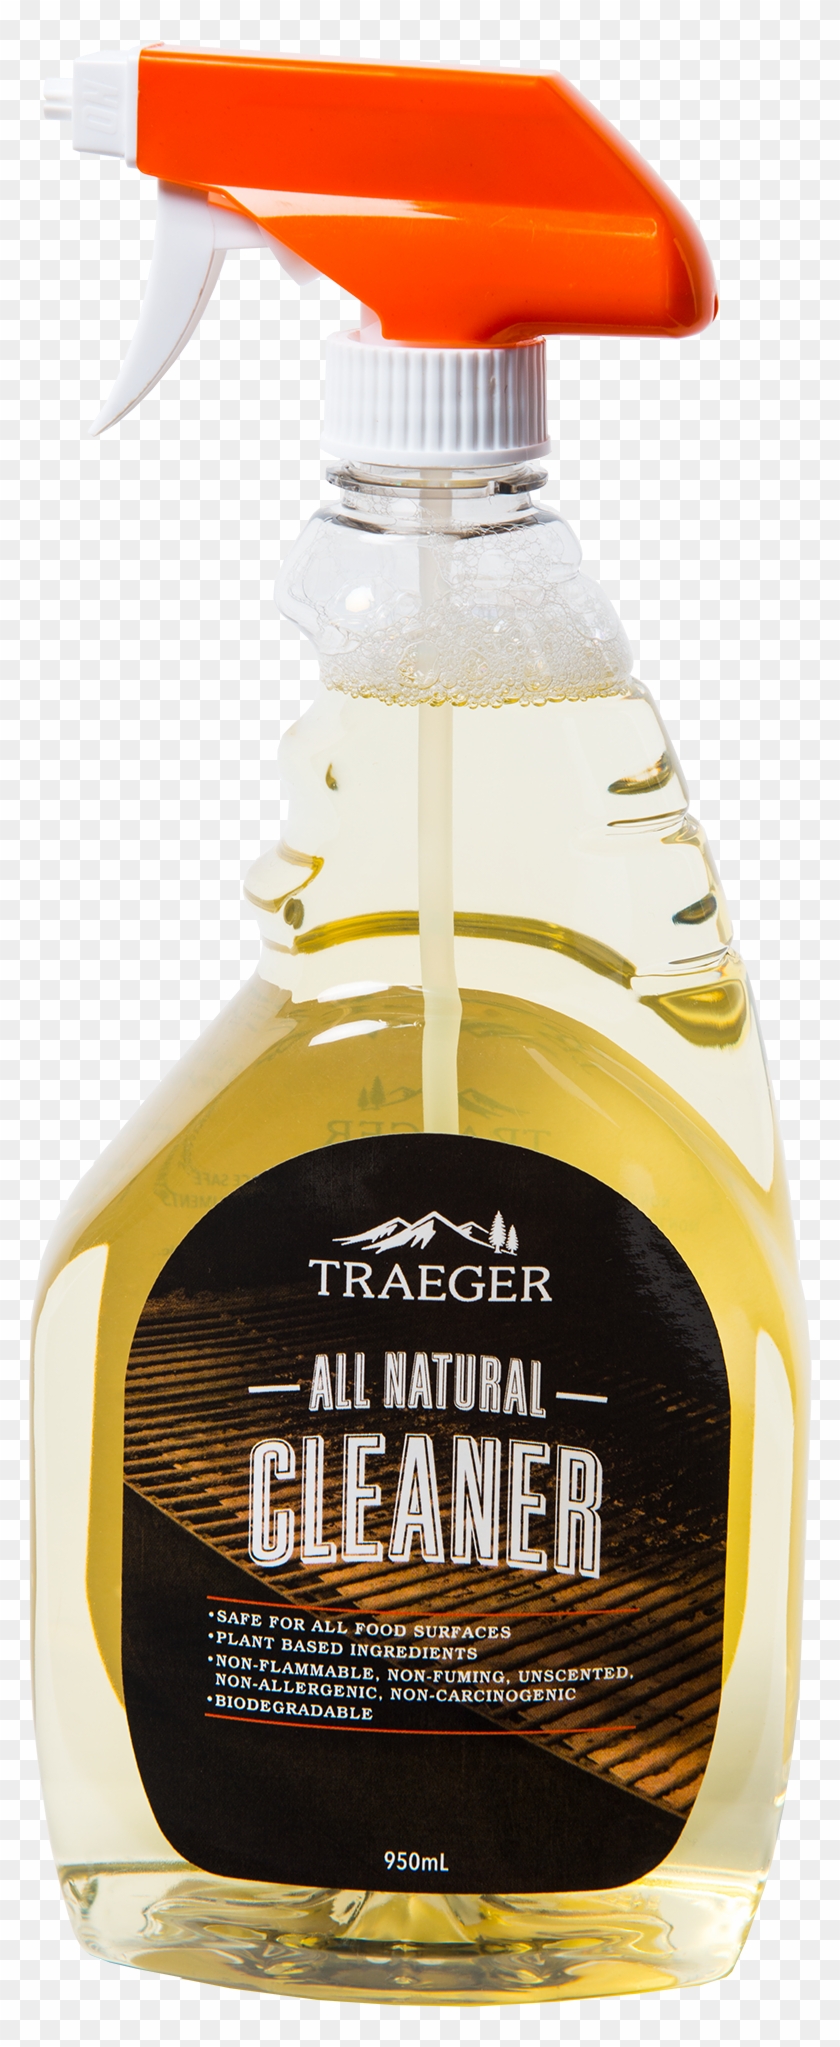 Traeger All Natural Grill Cleaner - Traeger All Natural Cleaner Clipart #5016620